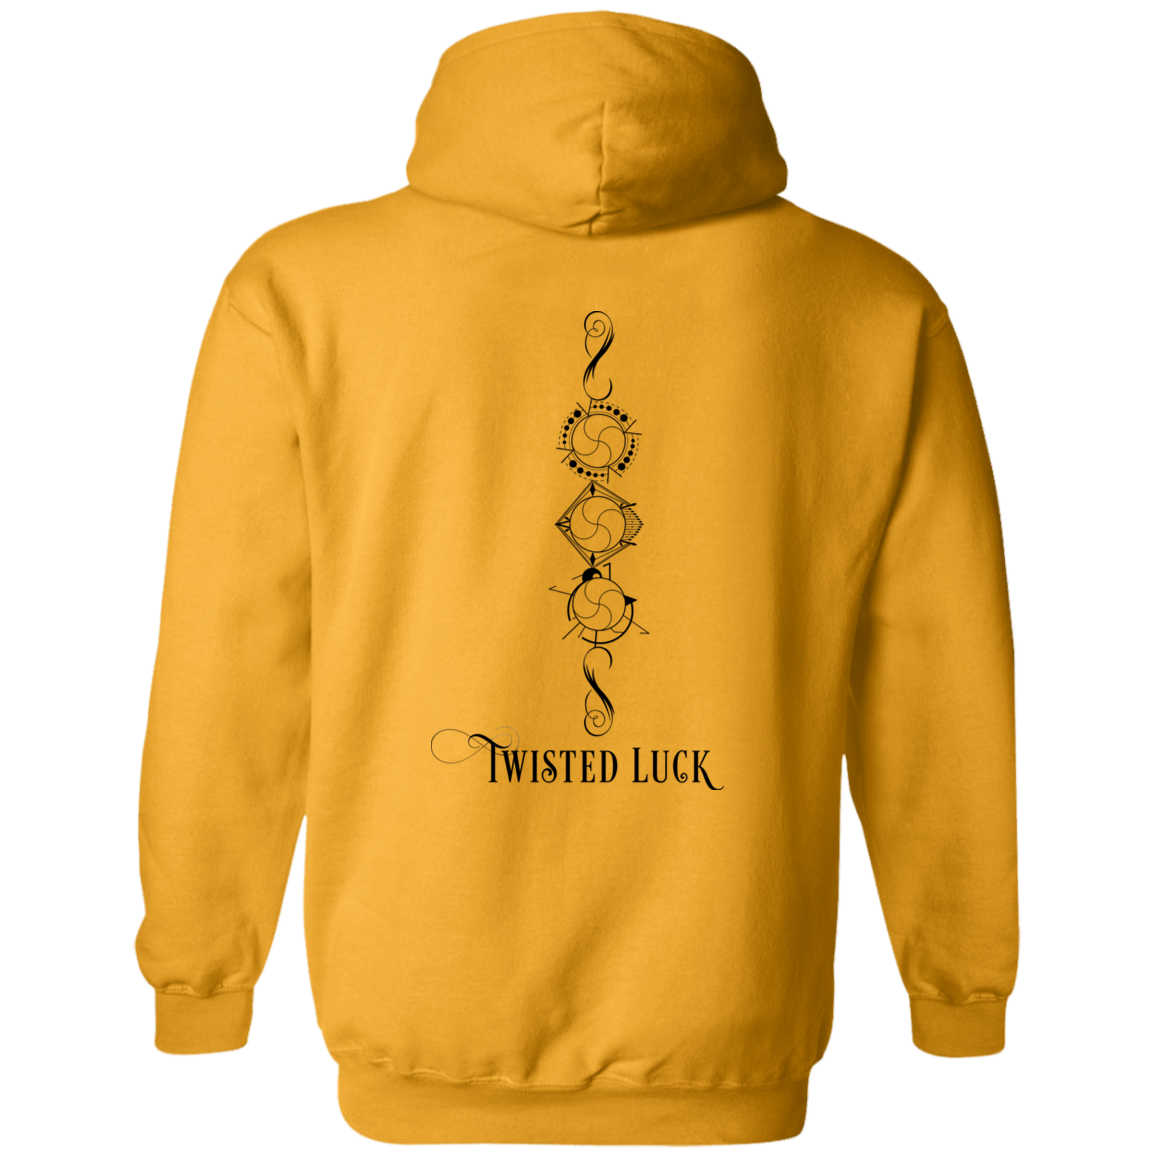 Twisted Luck Hoodie - Light colors